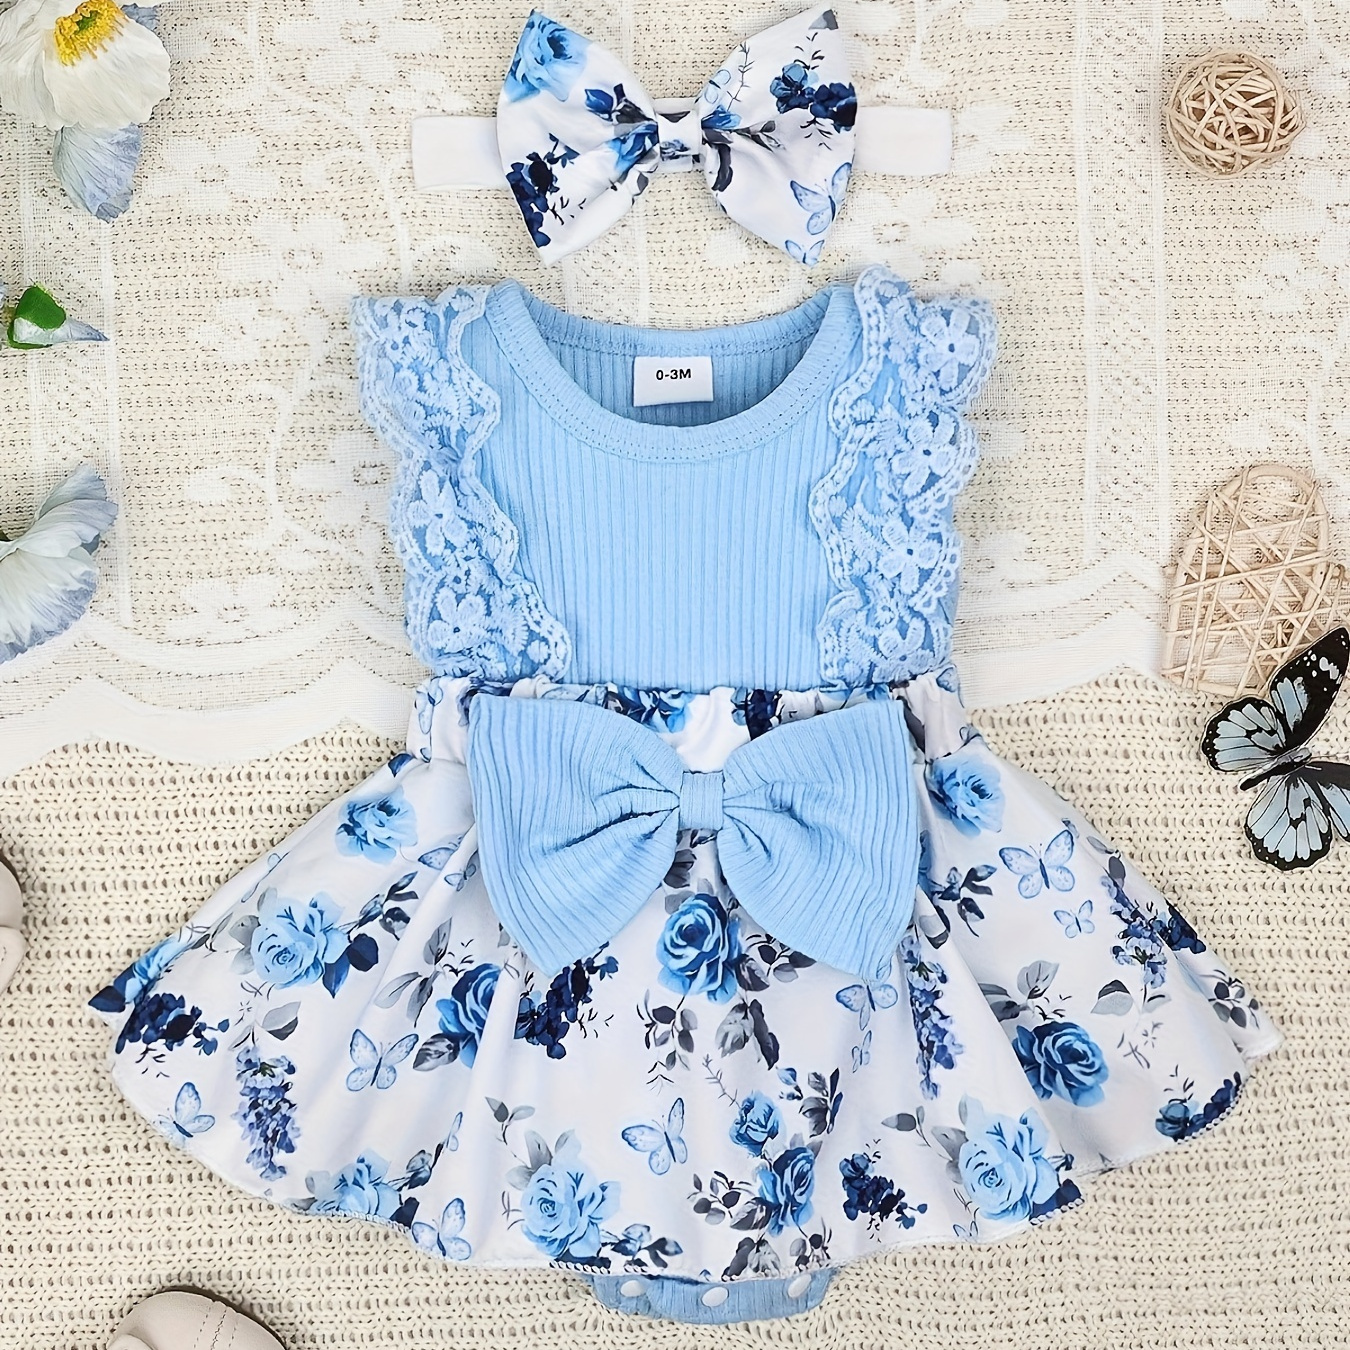 

Baby Girl Clothes Newborn Romper Dress Infant Lace Ruffle Sleeveless Summer One-piece Outfits With Headband Blue 0-12 Months